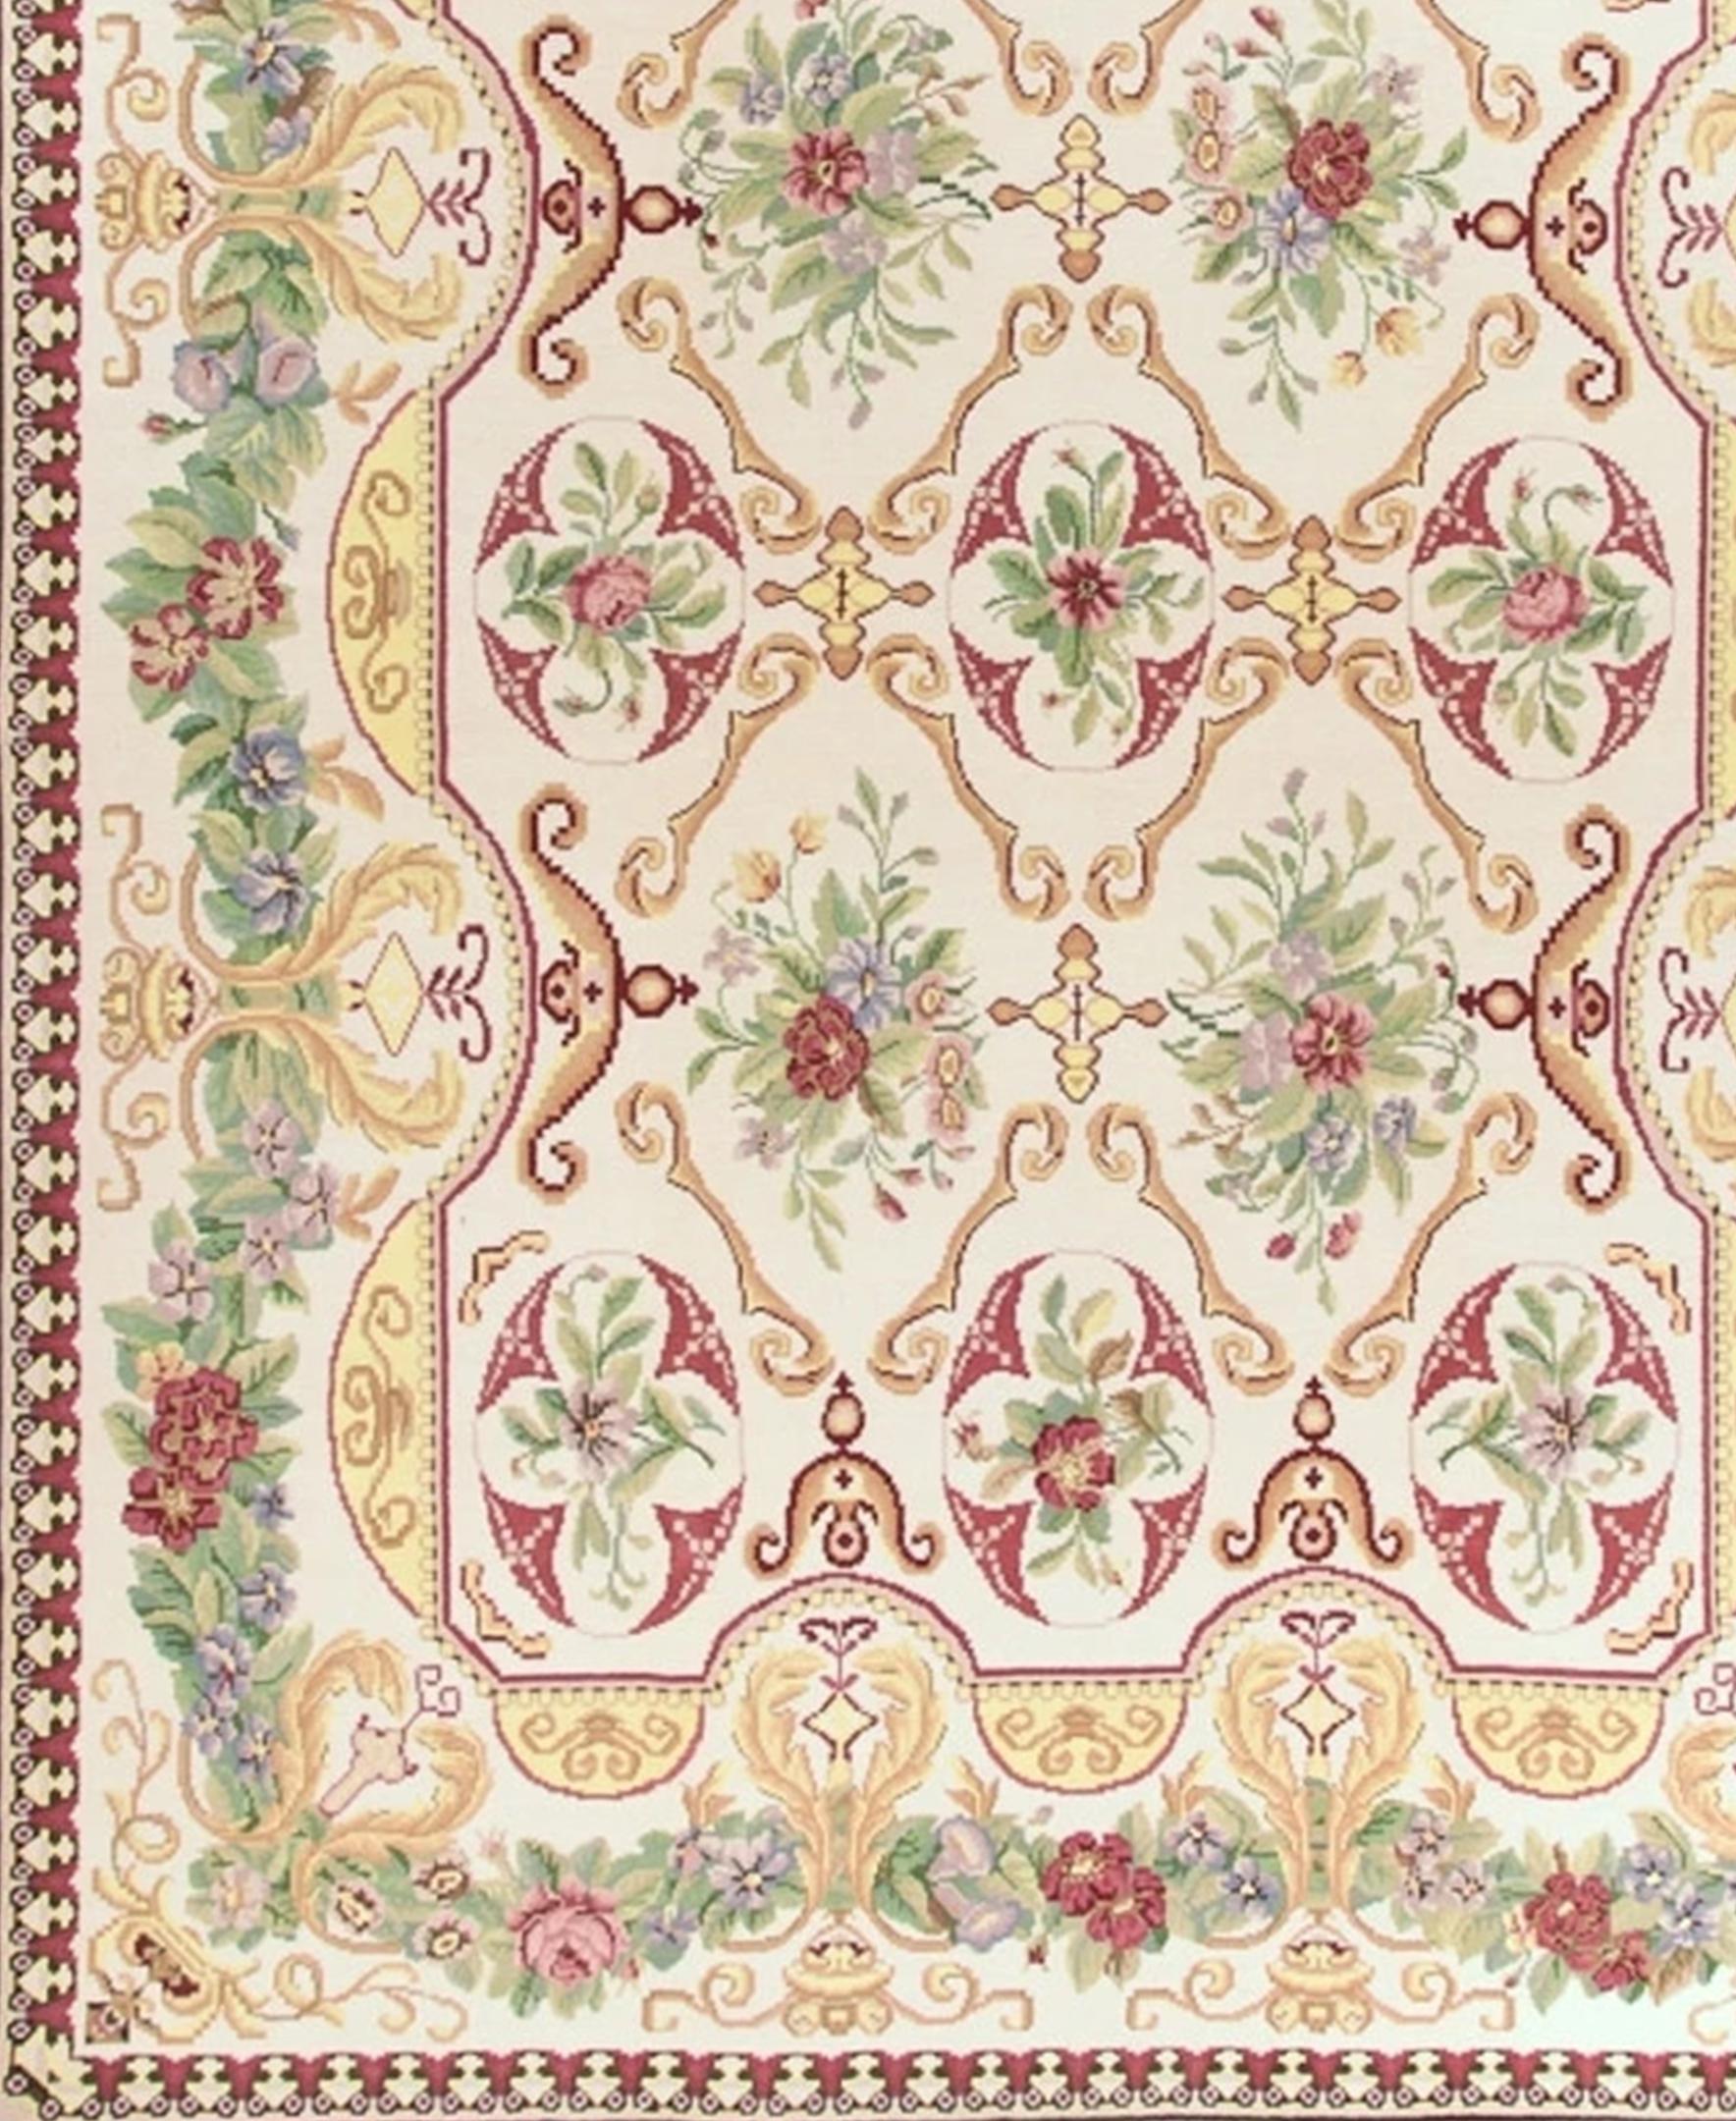 Based on an original painting by Elizabeth Moisan inspired by a Park Avenue interior designed by McMillen Inc. Mint, emerald, yellow, blue, aqua, lilac, orange and brick tones combine on an ivory ground in this charming Bessarabian pattern.